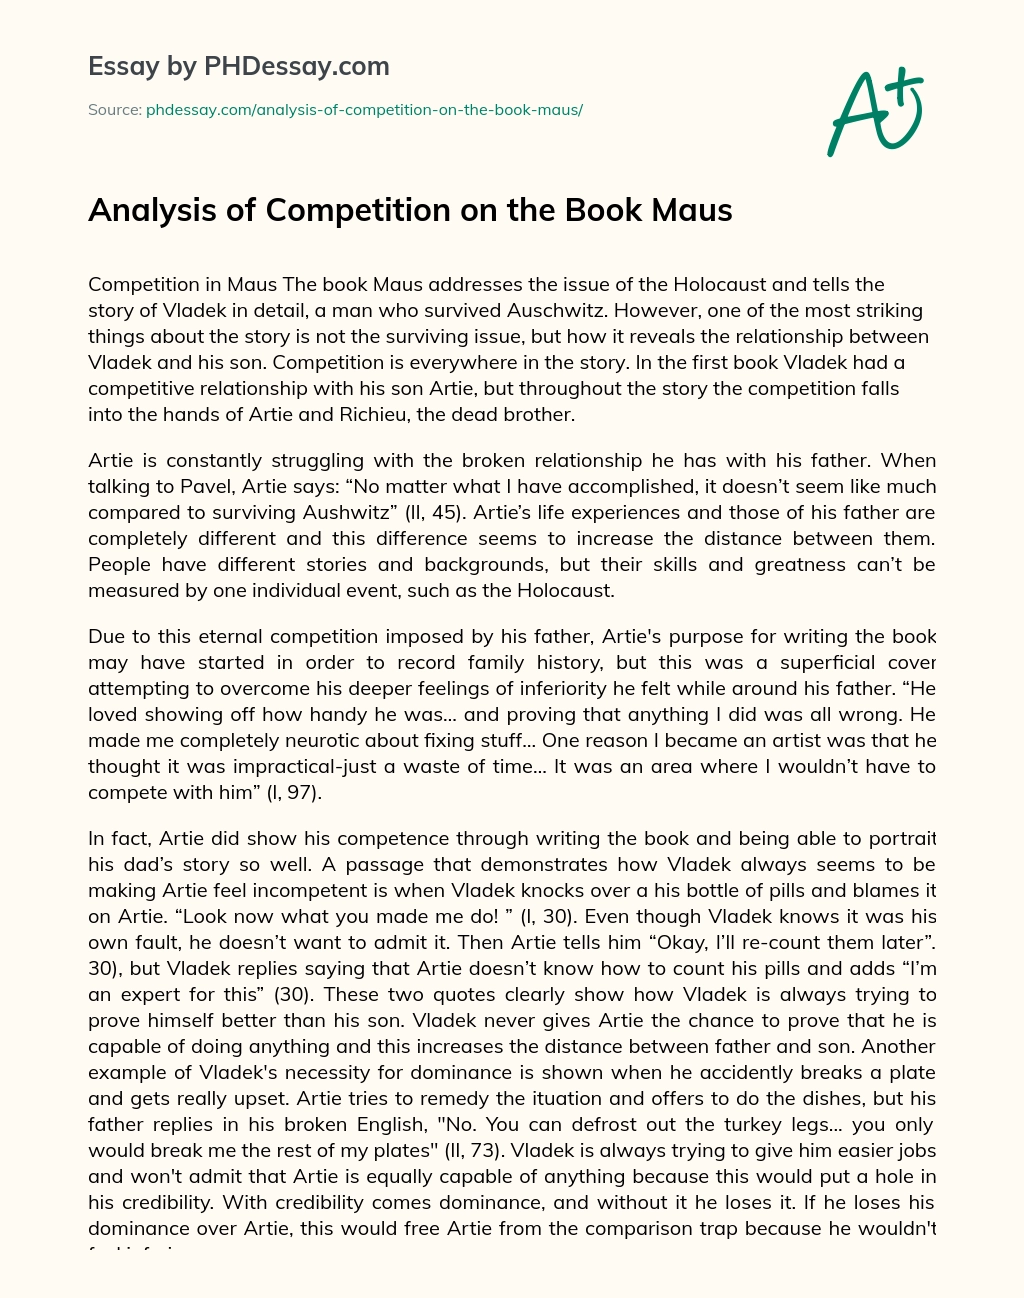 Analysis of Competition on the Book Maus essay